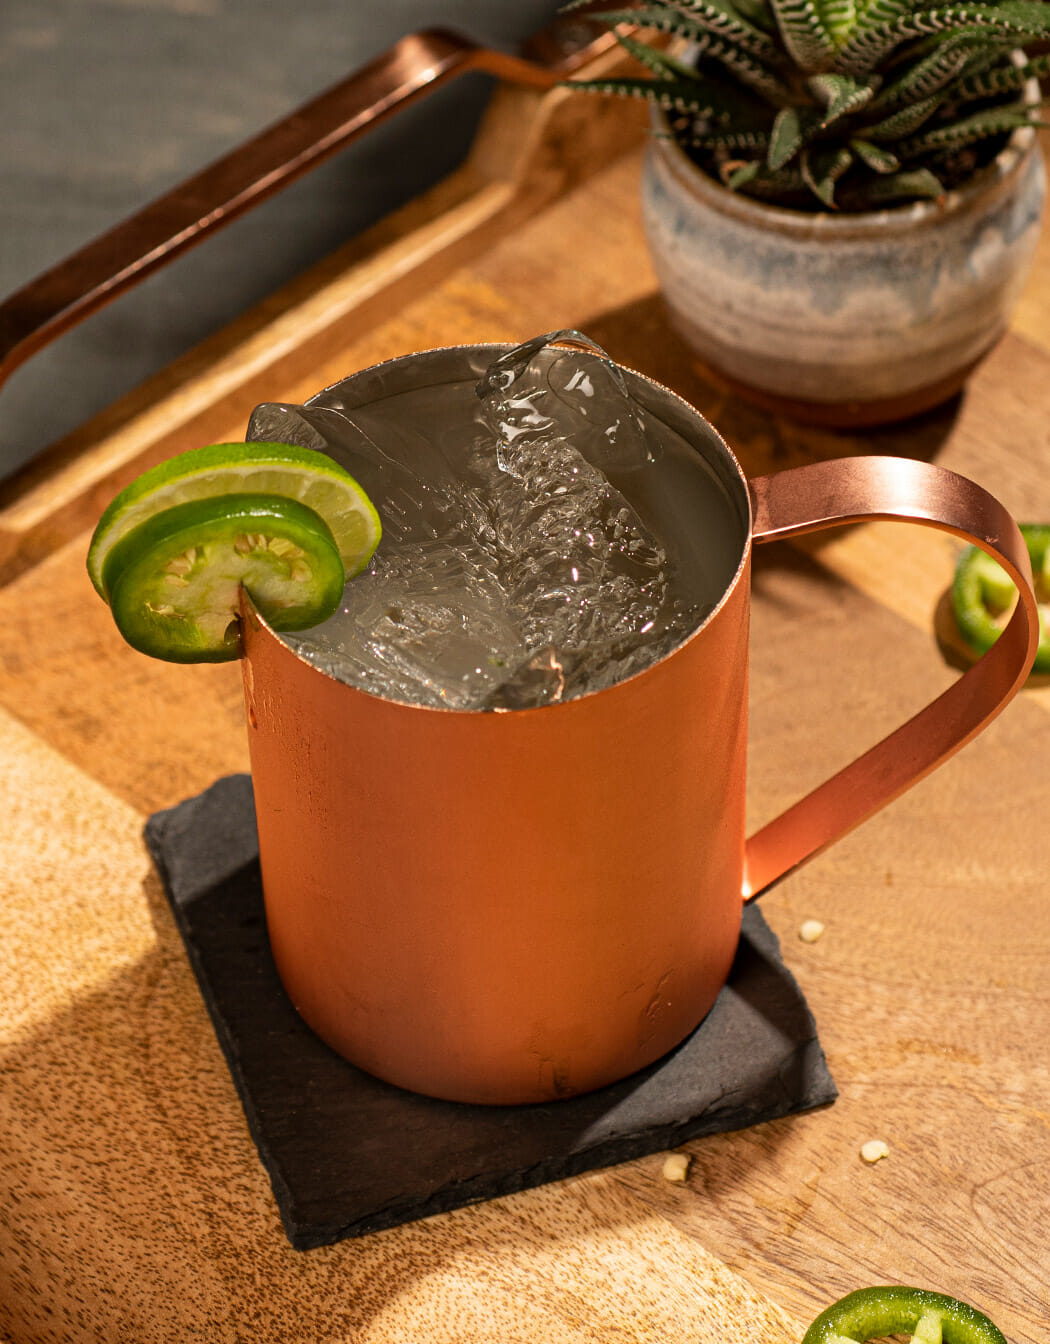 Mexican Mule cocktail